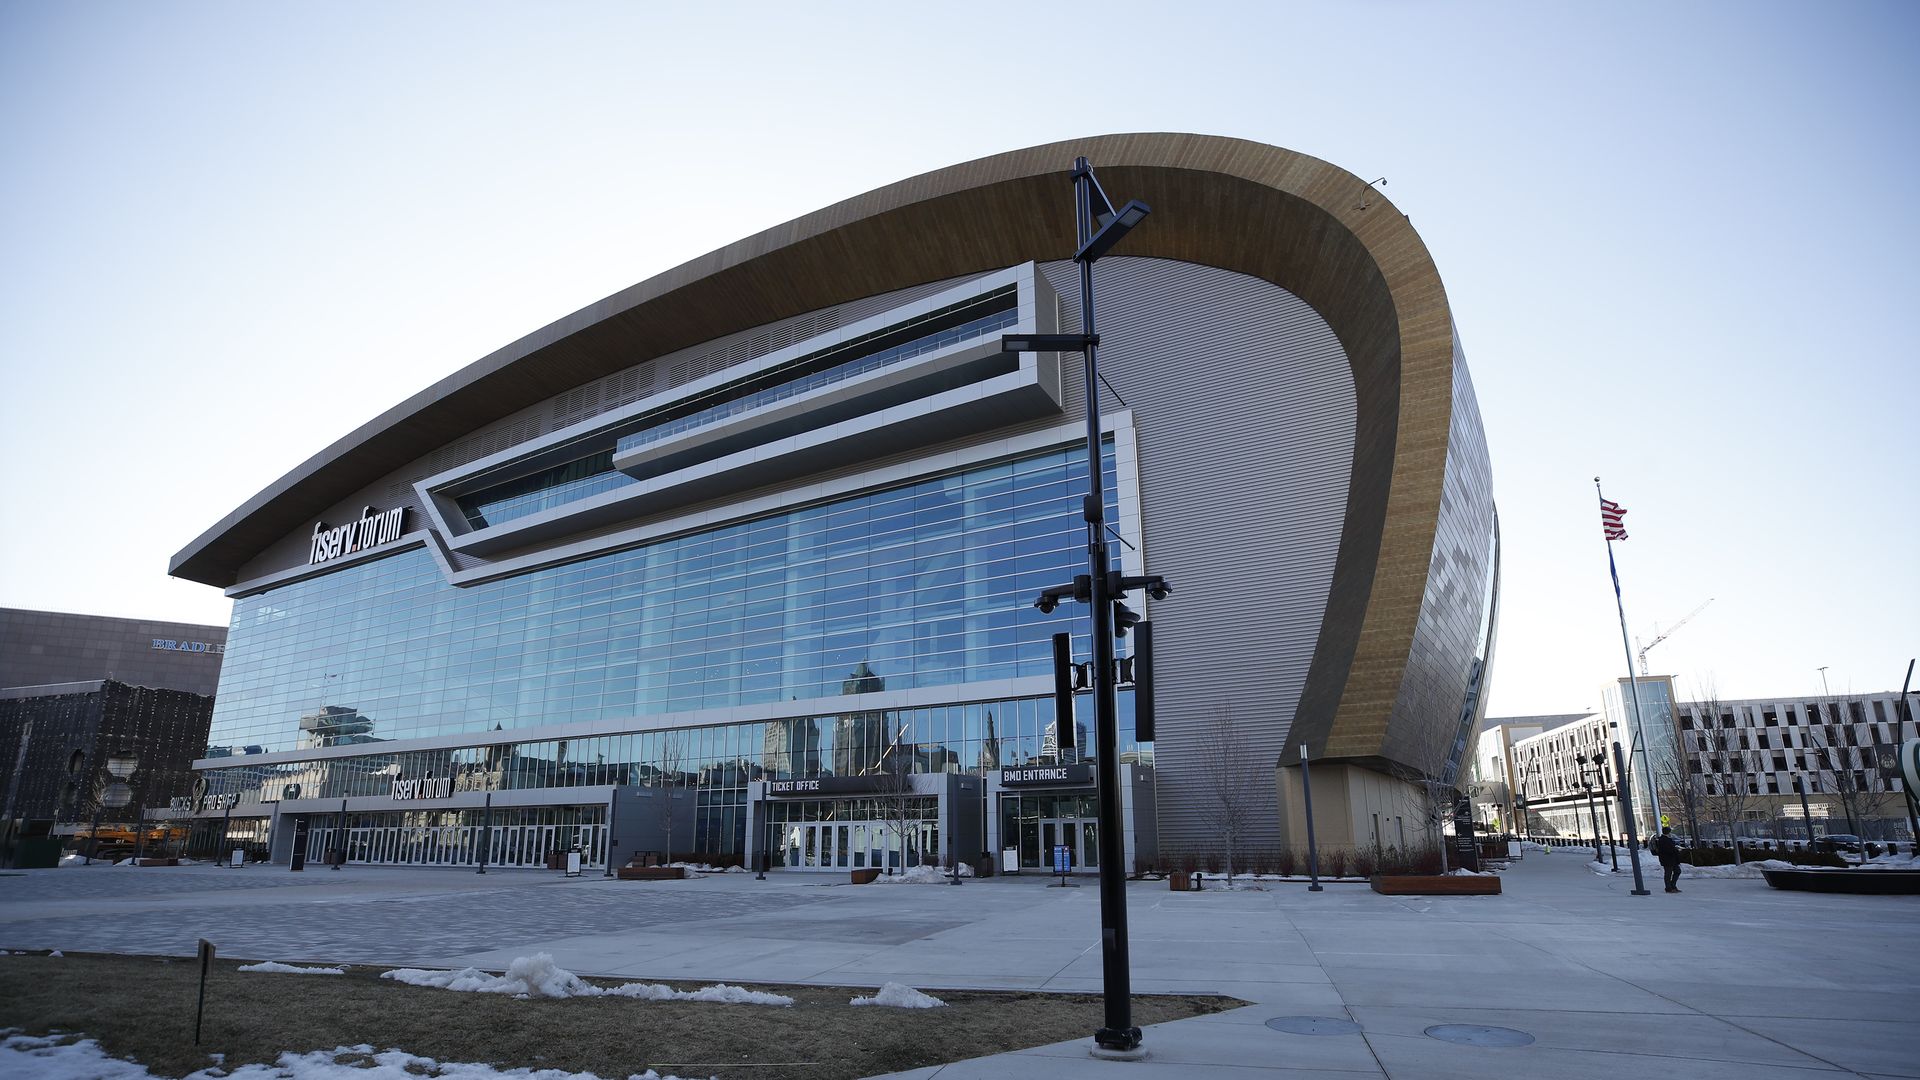 The fiserv.forum, the site of the 2020 Democratic National Convention, is seen in Milwaukee, Wisconsin 